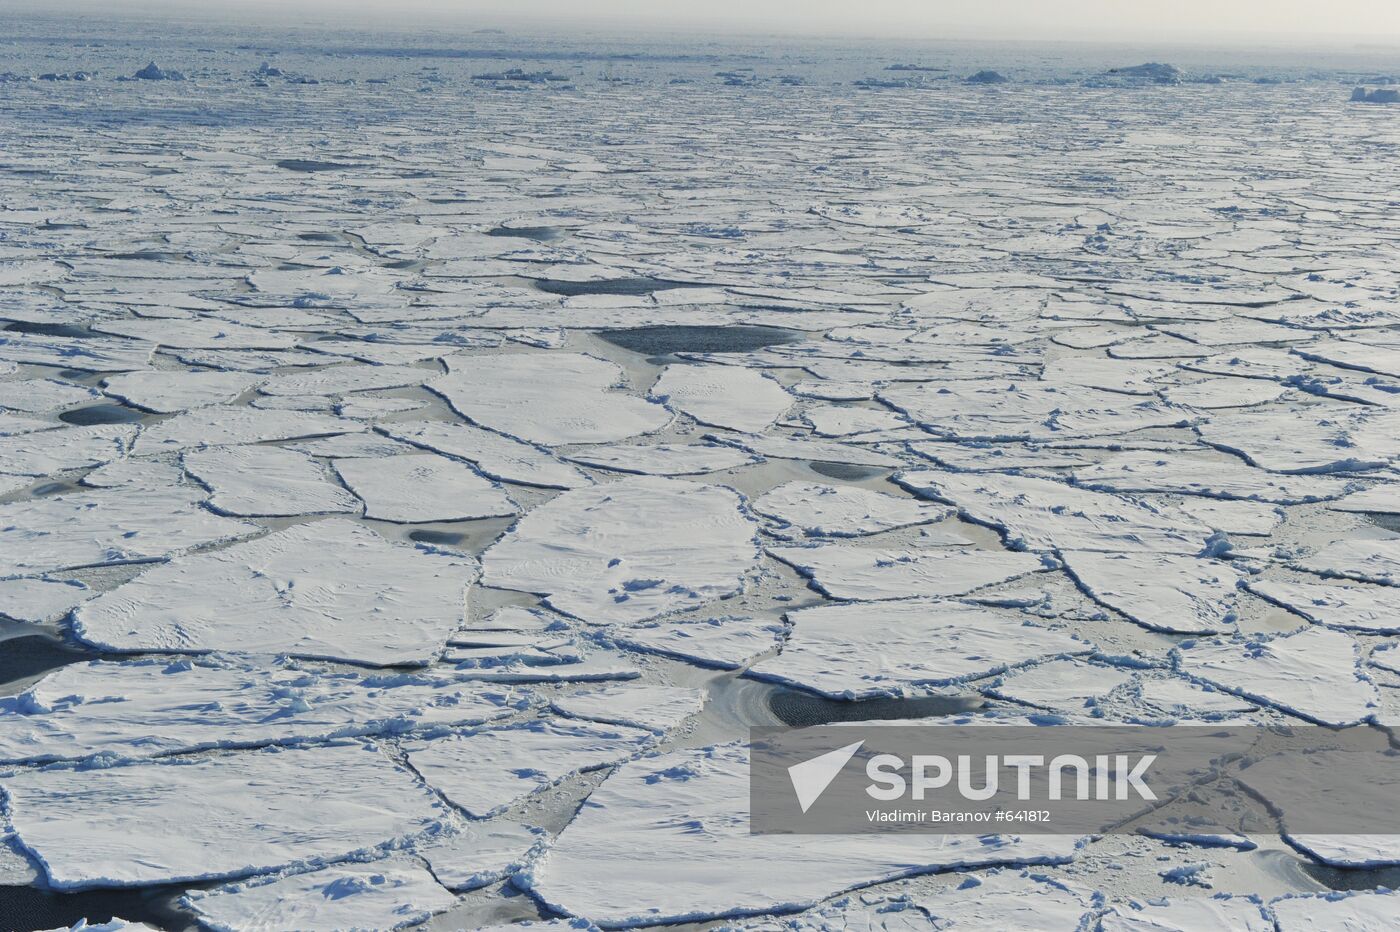 Ice sheets in the Arctic Ocean